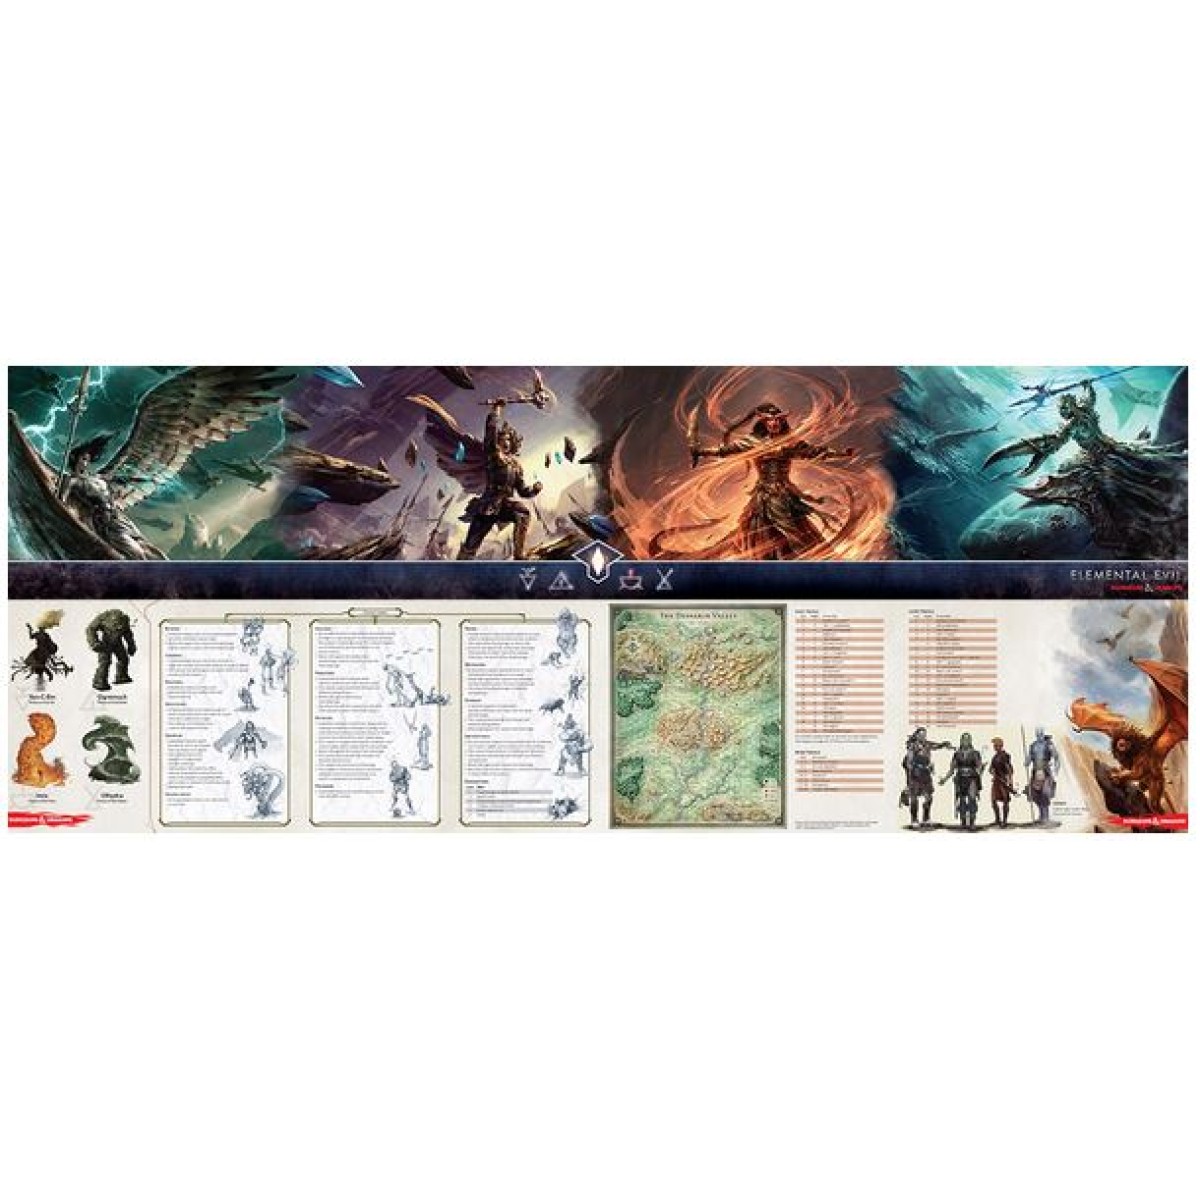 Dungeons and Dragons RPG Temple of Elemental Evil DM Screen Gf9 for sale online